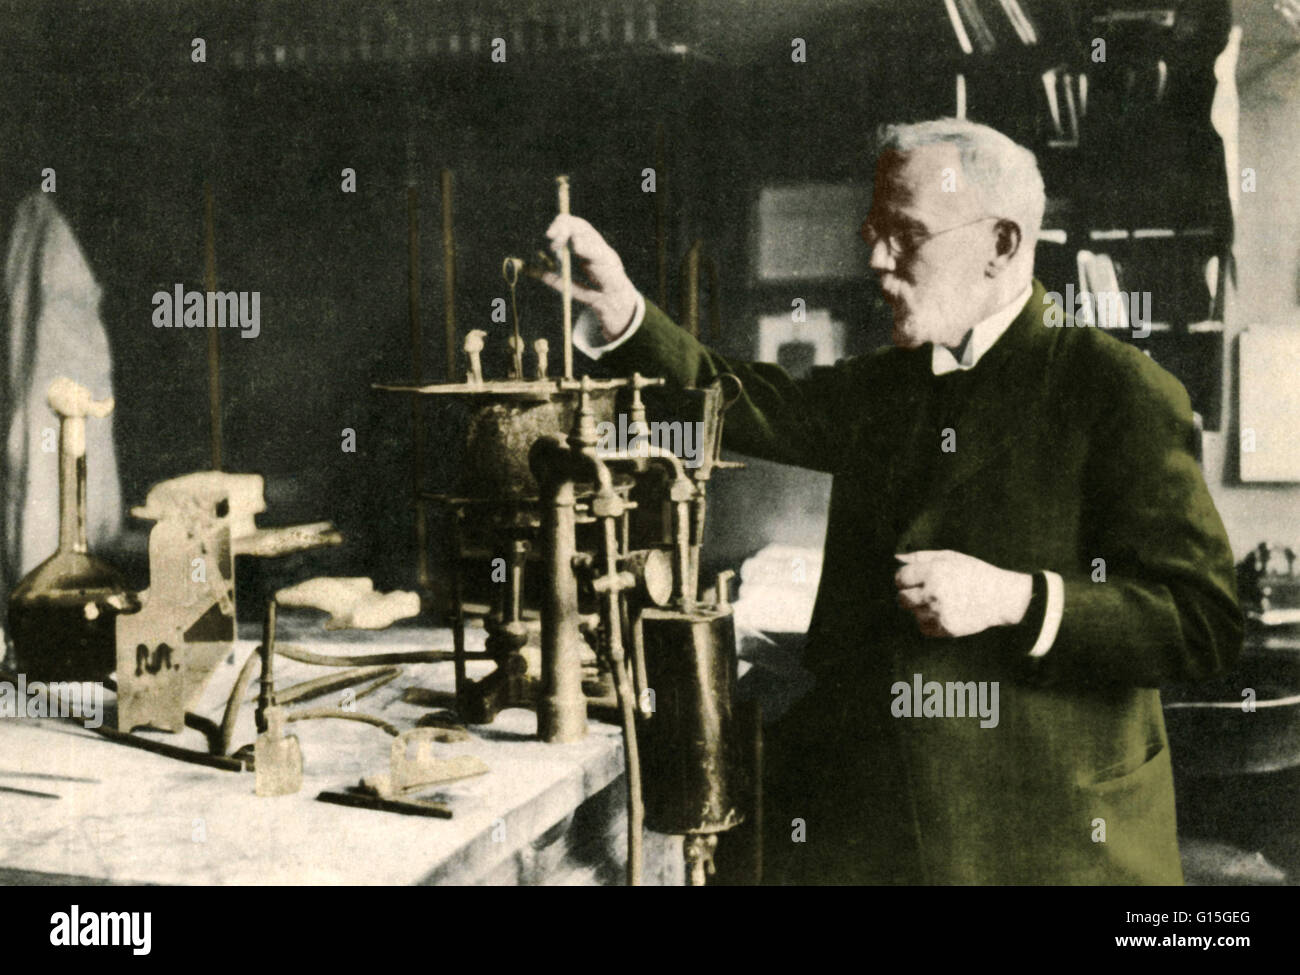 Ehrlich performing a set test pattern for chemotherapy with Salvarsan. Paul Ehrlich (March 14, 1854-August 20, 1915) was a German physician and scientist who worked in the fields of hematology, immunology, and chemotherapy. The methods he developed for st Stock Photo